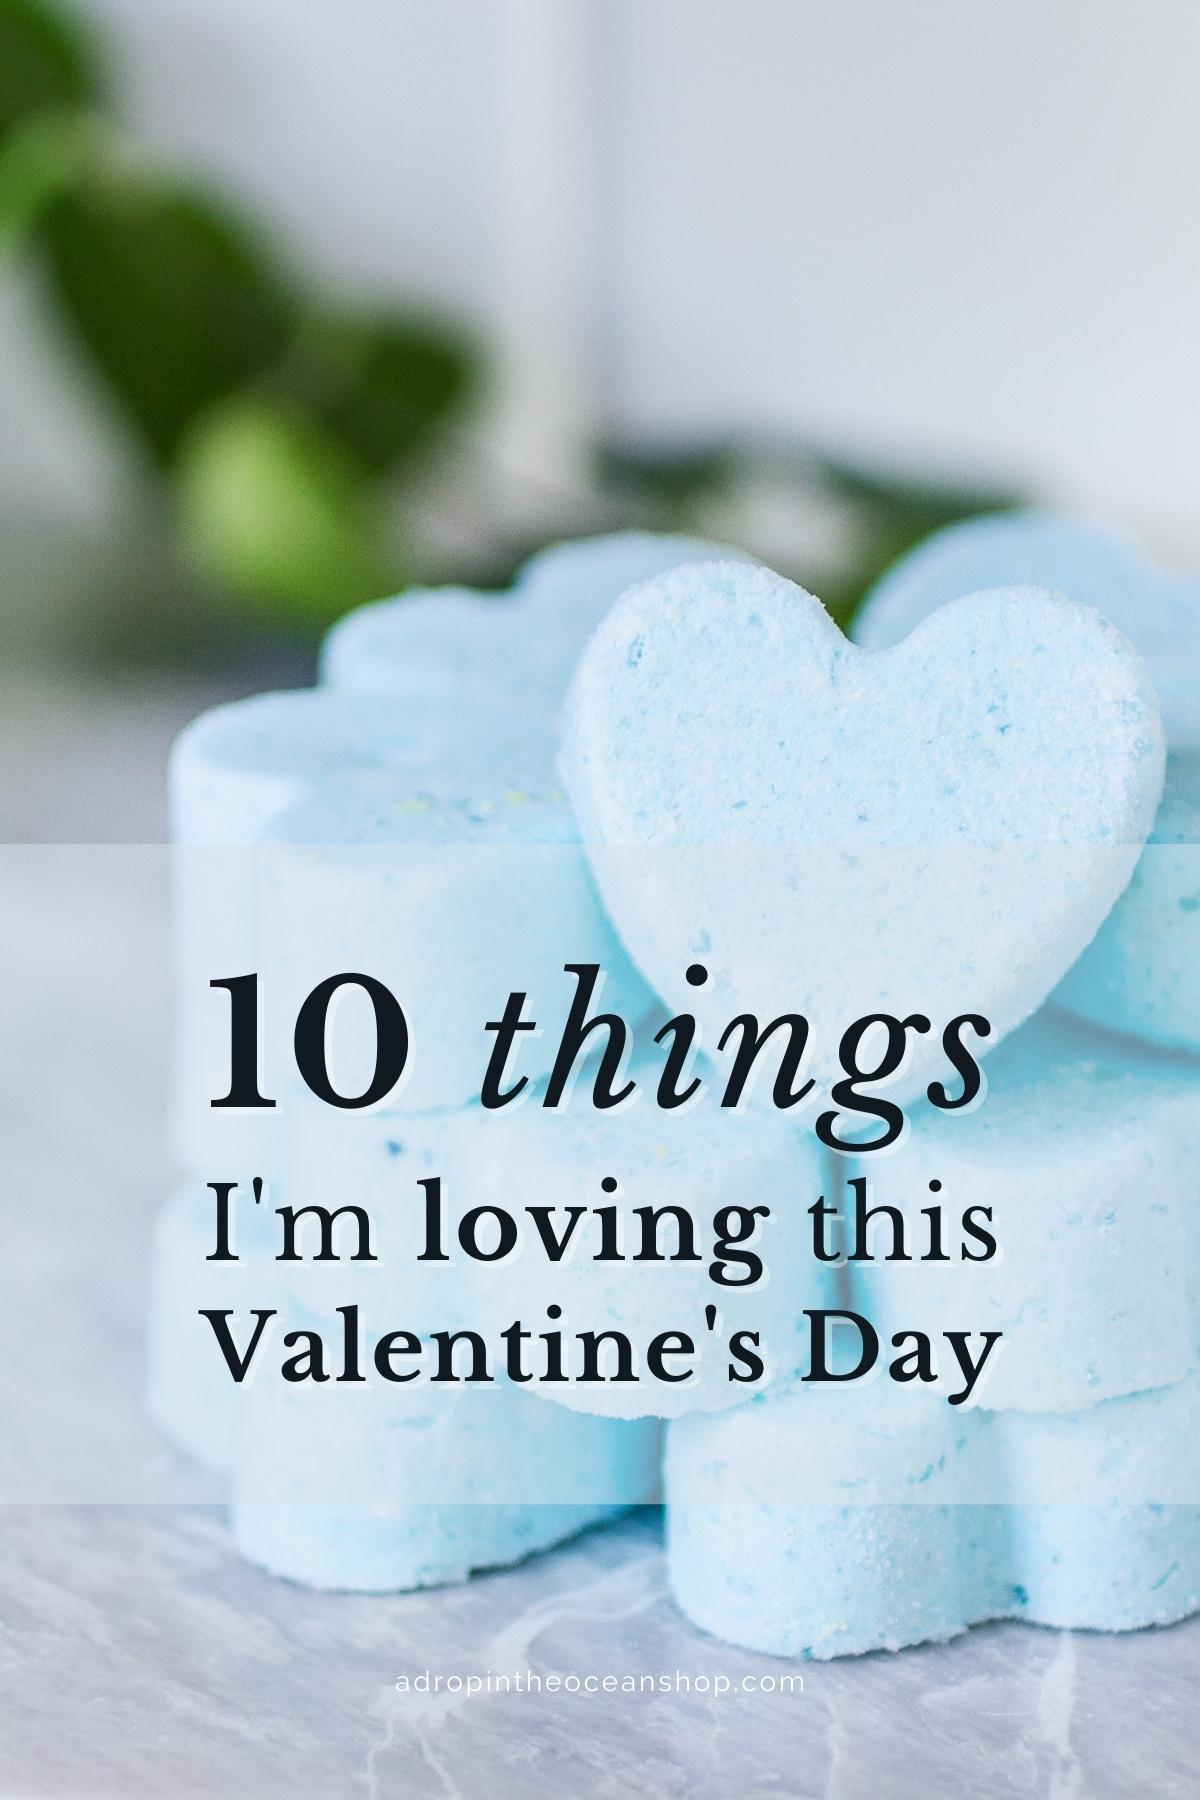 A Drop in the Ocean Shop 10 Things I'm Loving This Valentine's Day